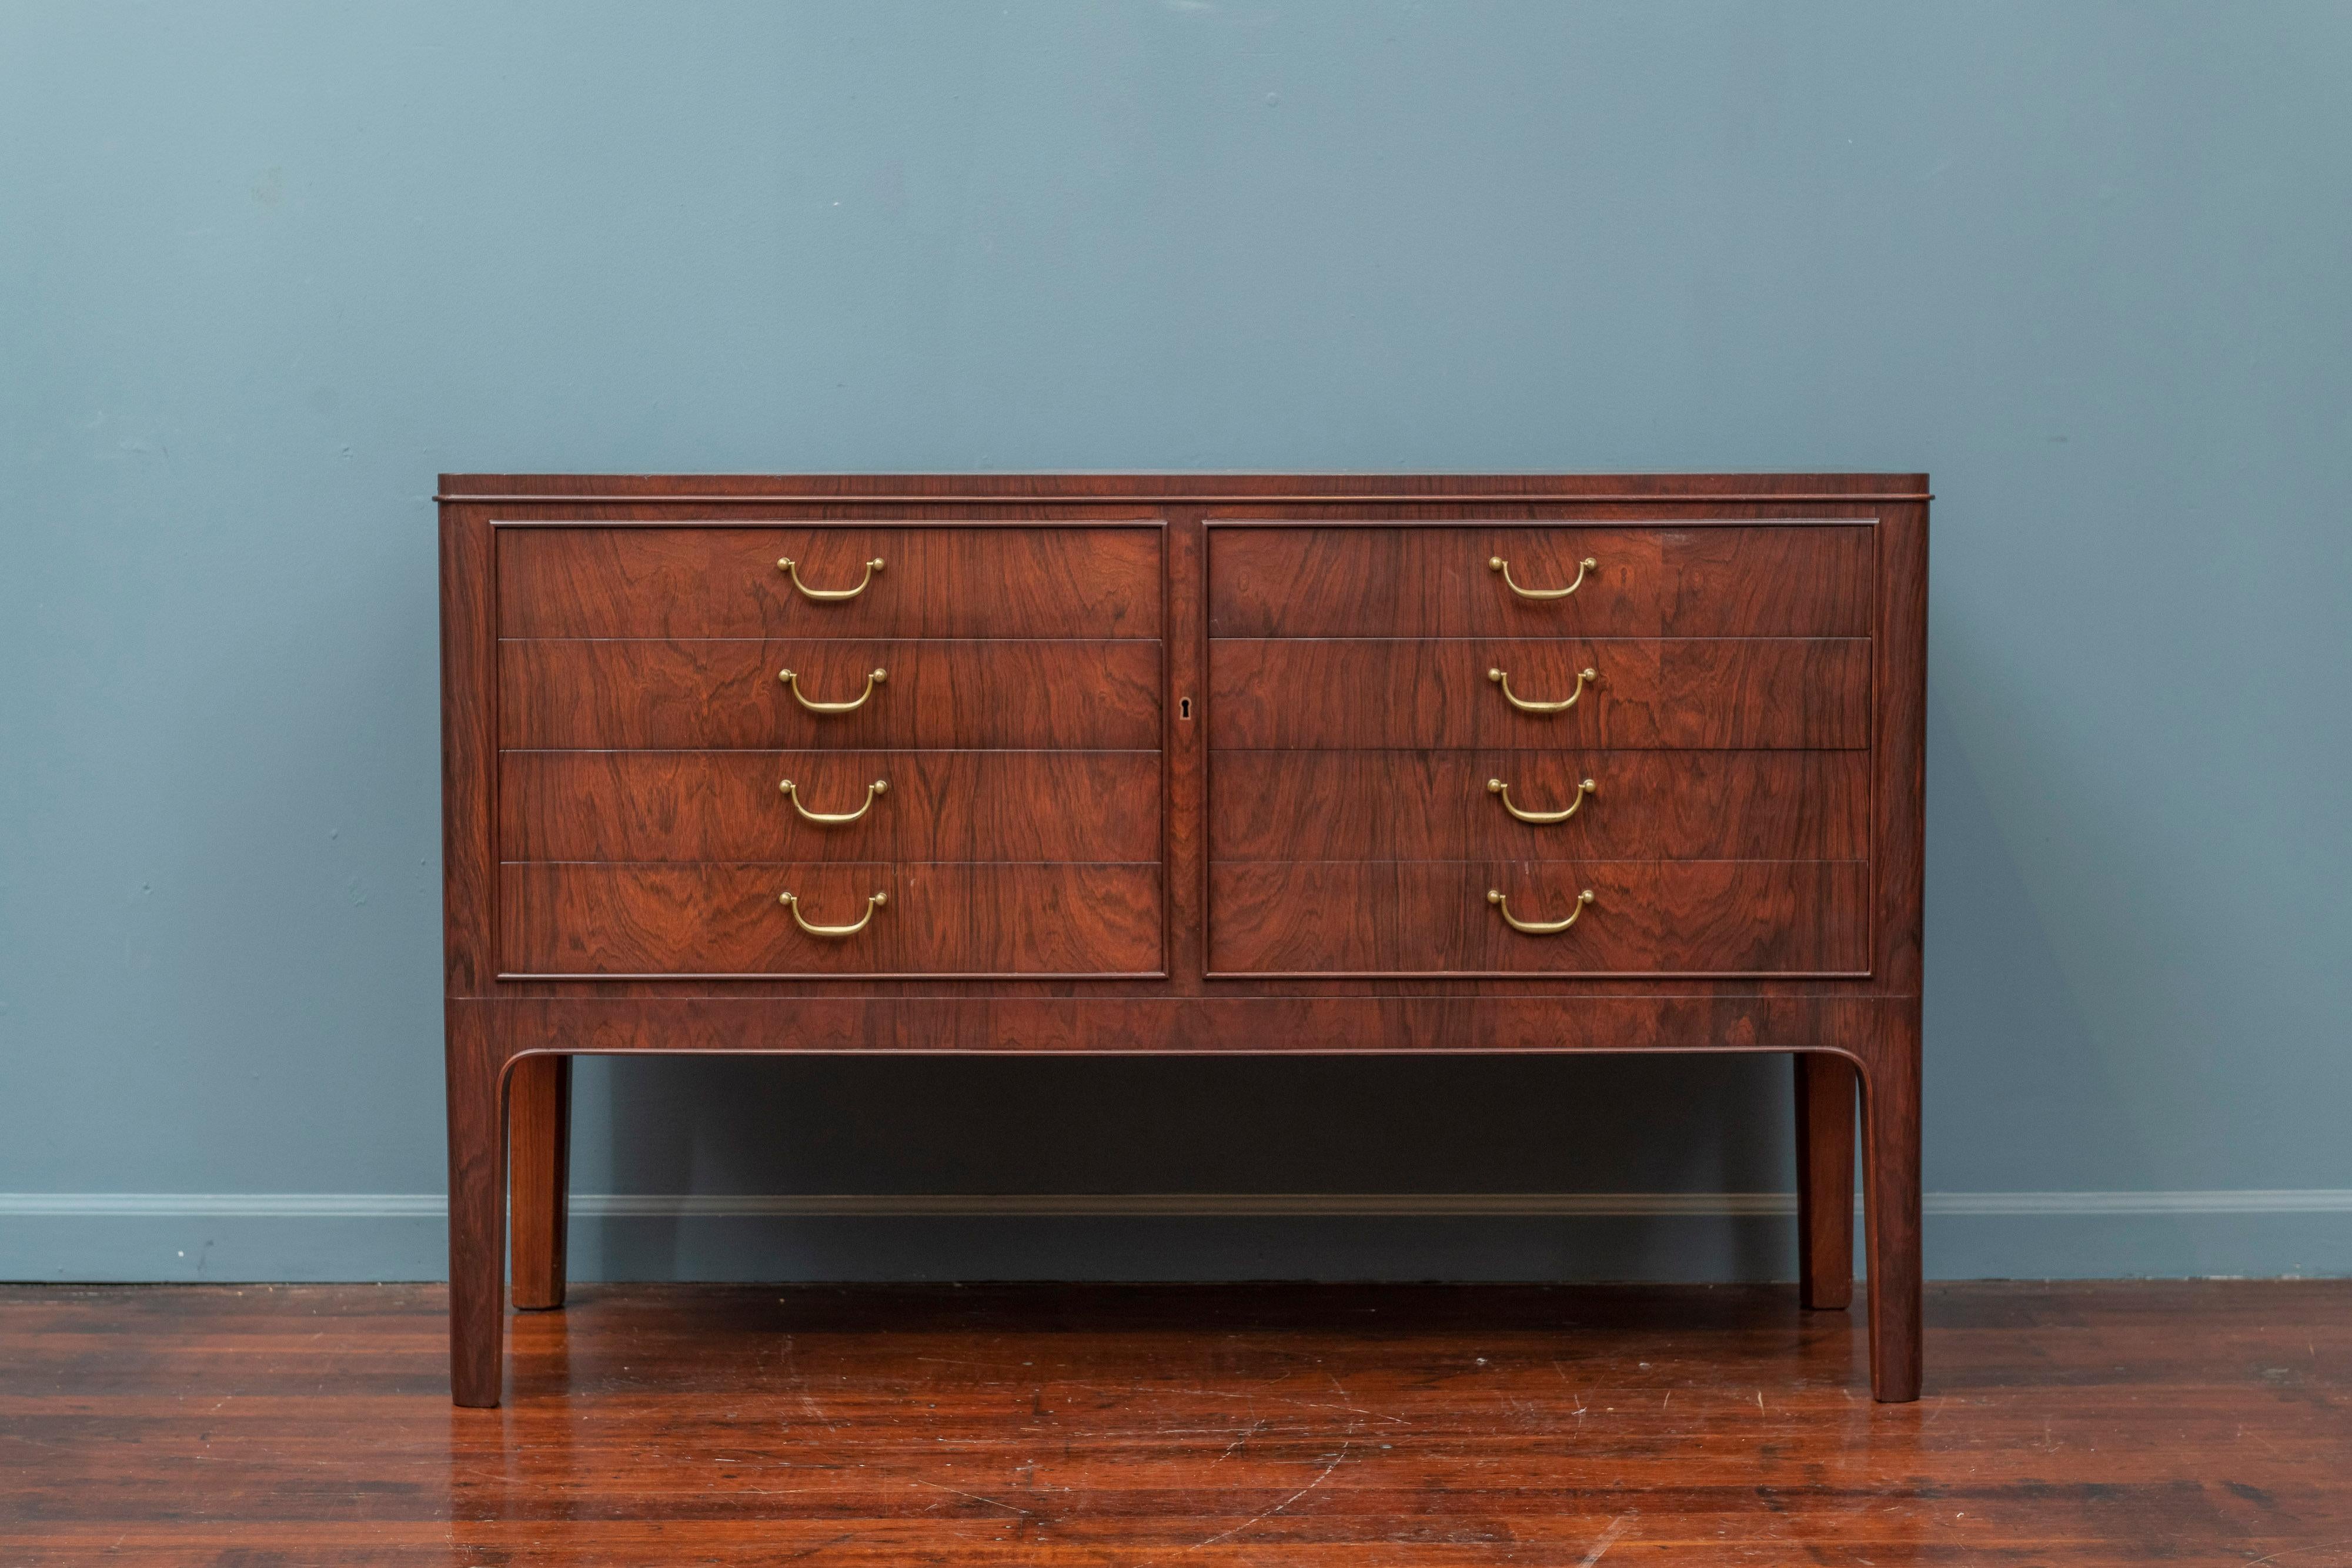 Scandinavian Modern credenza in the style of Kaare Klint for C.B. Hansens, Denmark. 
High quality construction and attention to detail, labeled C.B Hansens Kobenhaven.